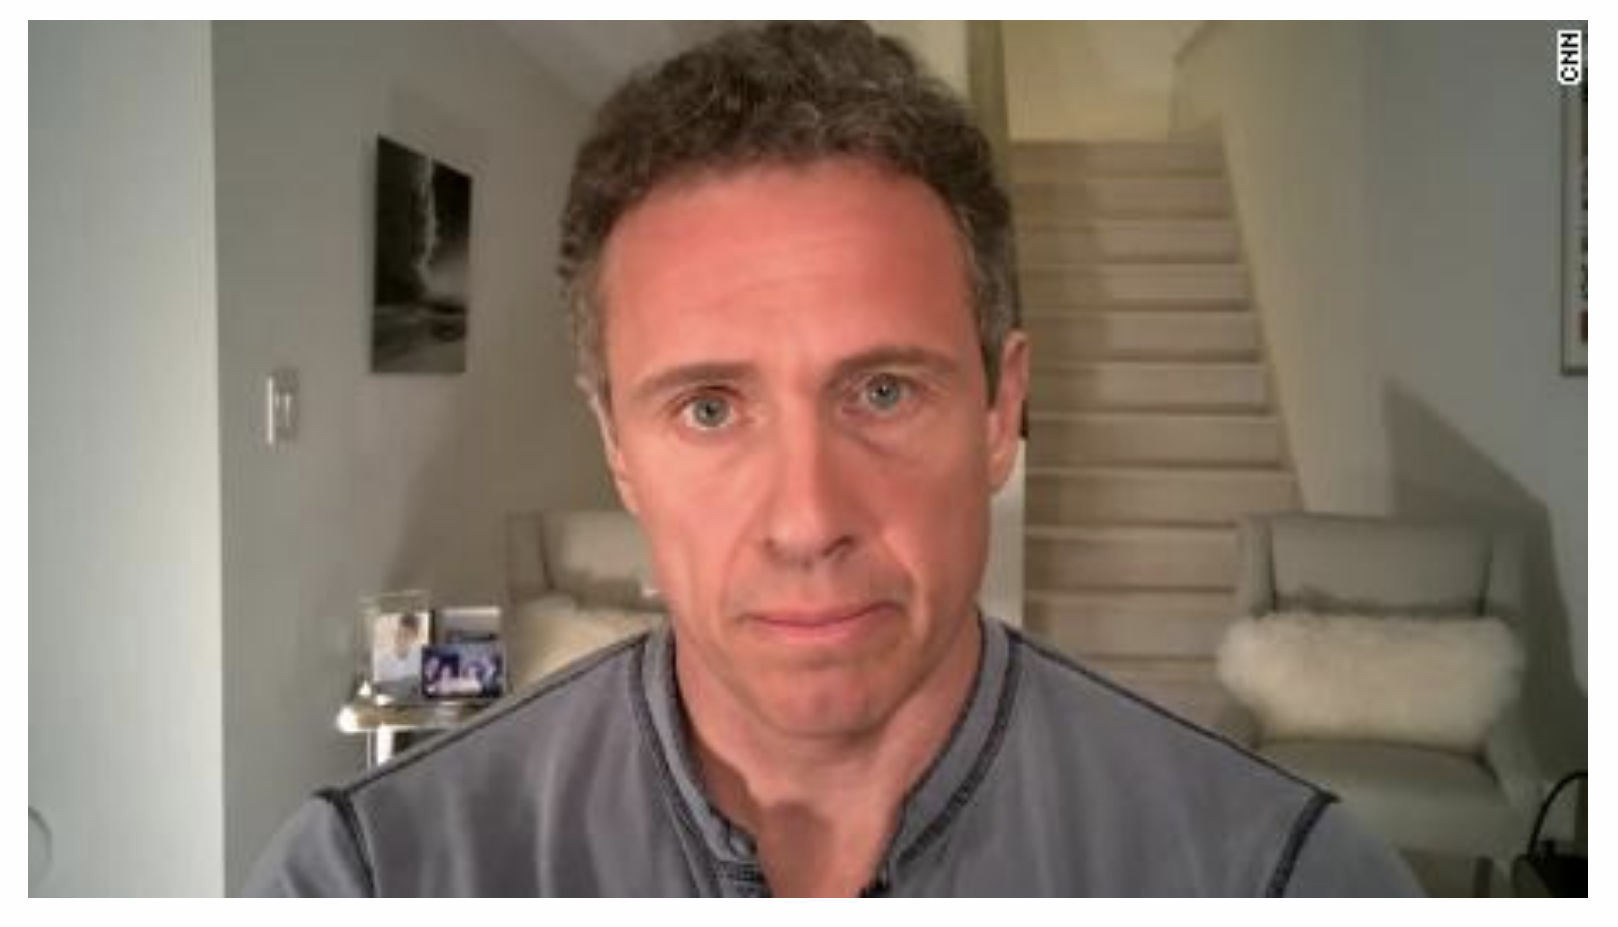 Chris Cuomo S Wife Believes She S Healing Covid 19 With Juice And Homeopathy Maybe She Is But Let S Be Real